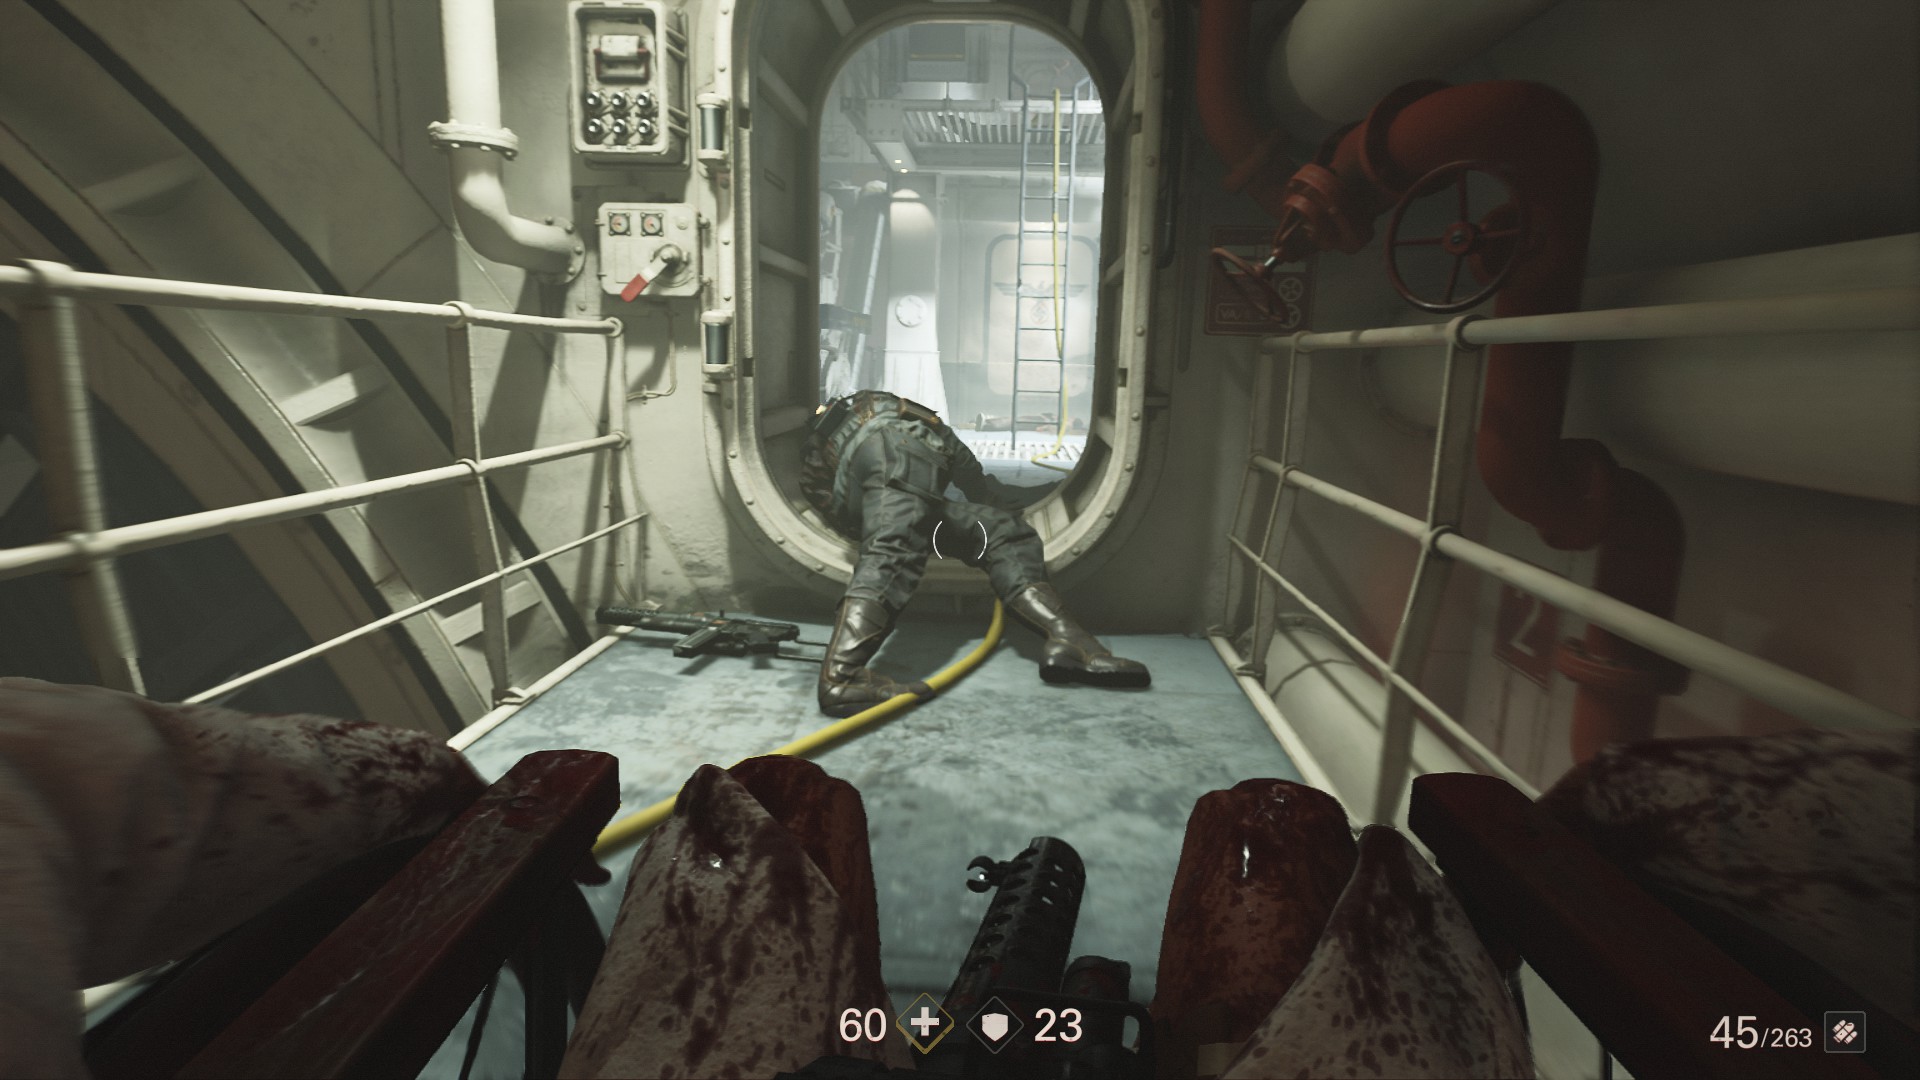 Wolfenstein: The New Order Review (PC) - PlayLab! Magazine